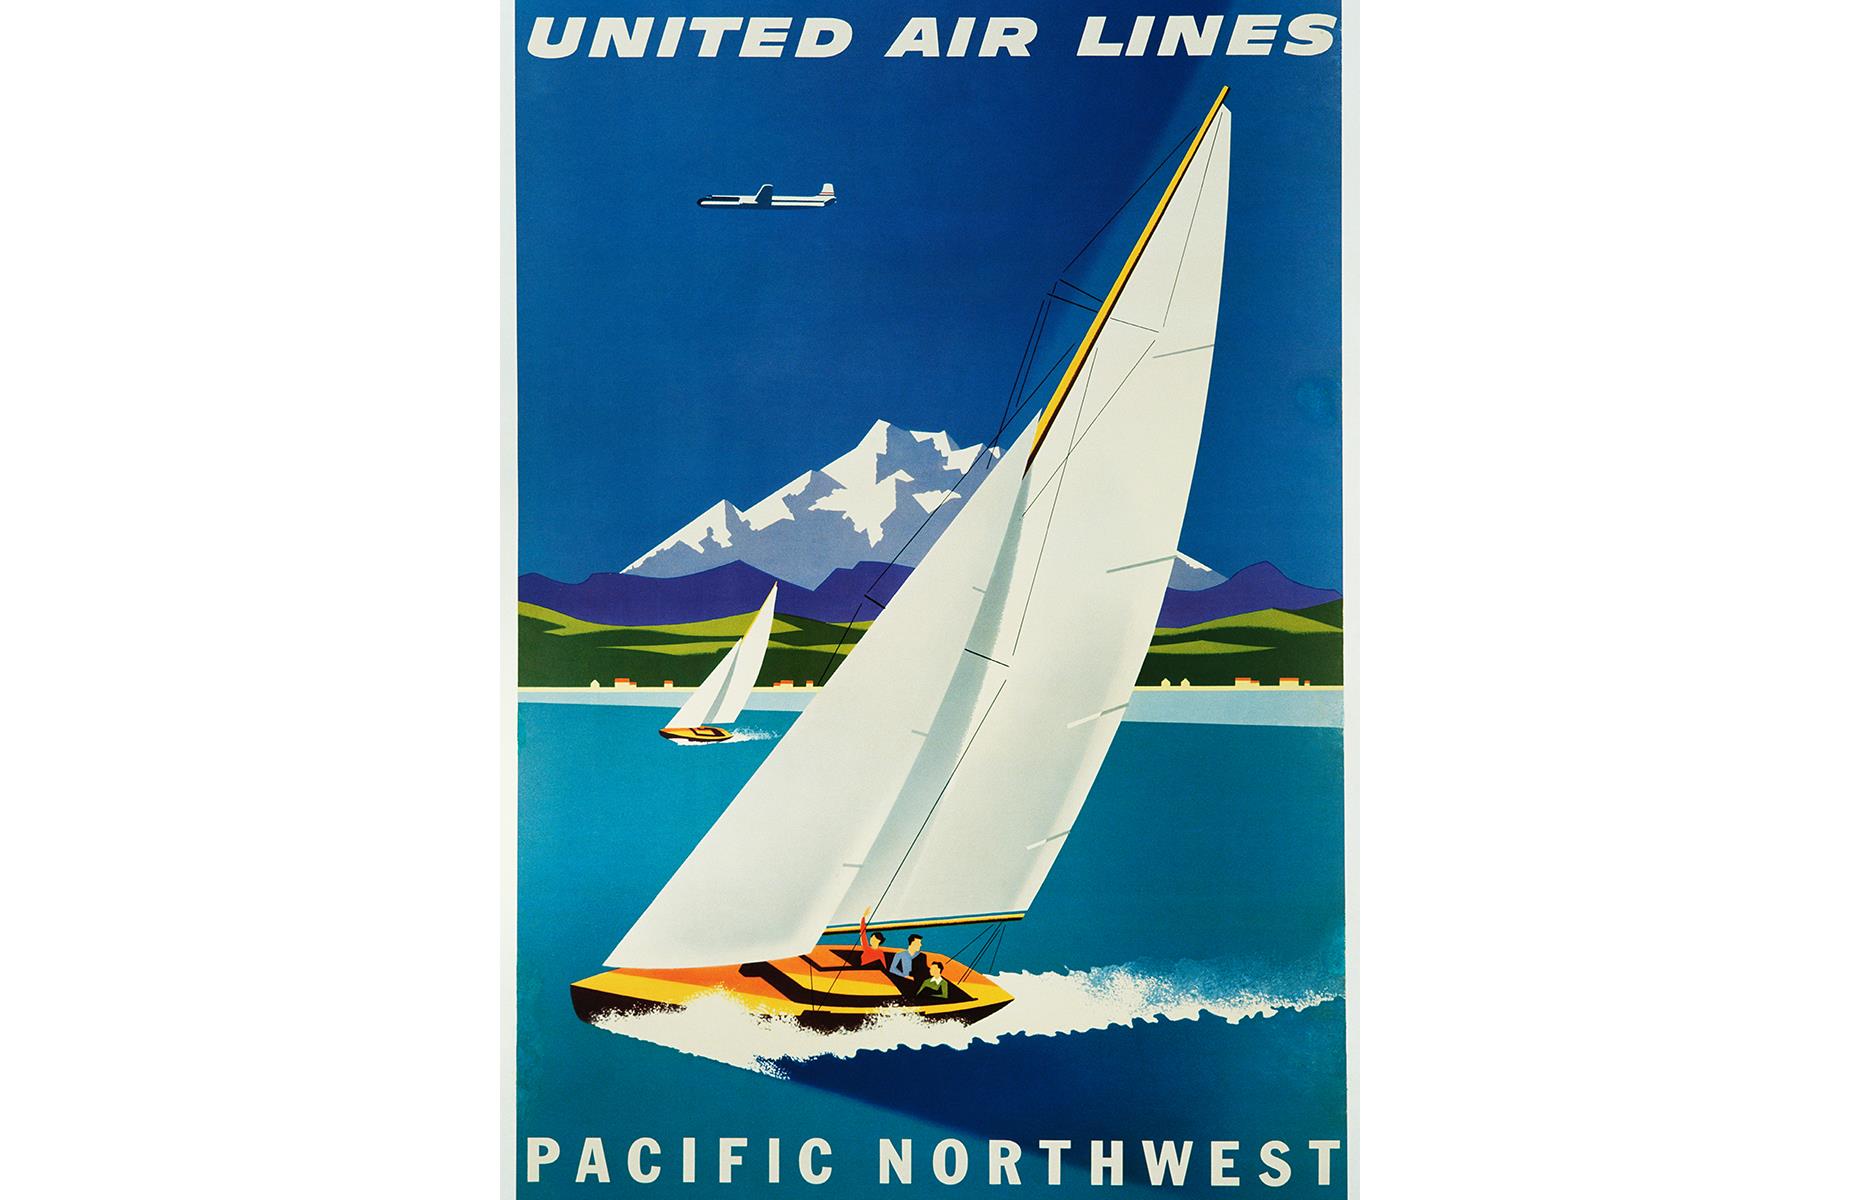 The Pacific Northwest is famed for its vivid blue and green landscapes – think verdant forests and sapphire glacial lakes under a baby-blue sky. This United Airlines poster captures the region's essence perfectly. Vacationers sail a vast lake that's backed with rolling hills and a snow-crowned mountain.